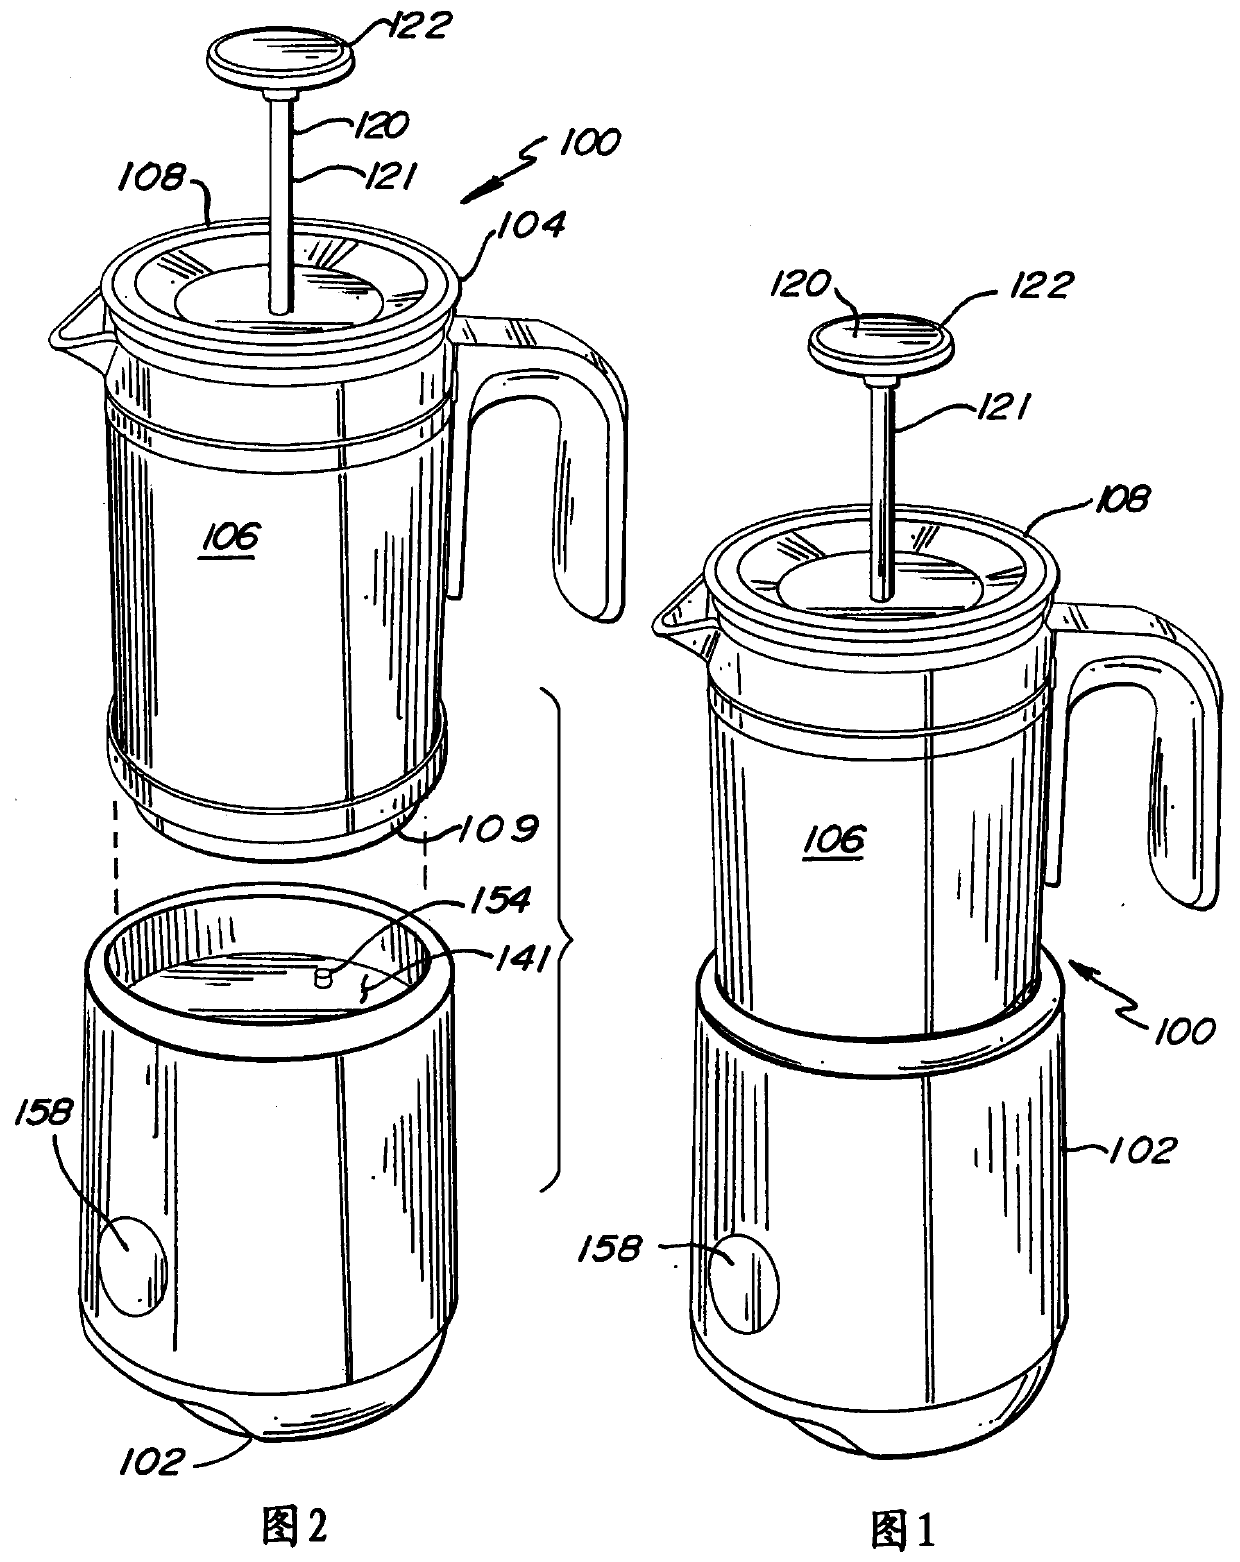 Coffee maker and frother